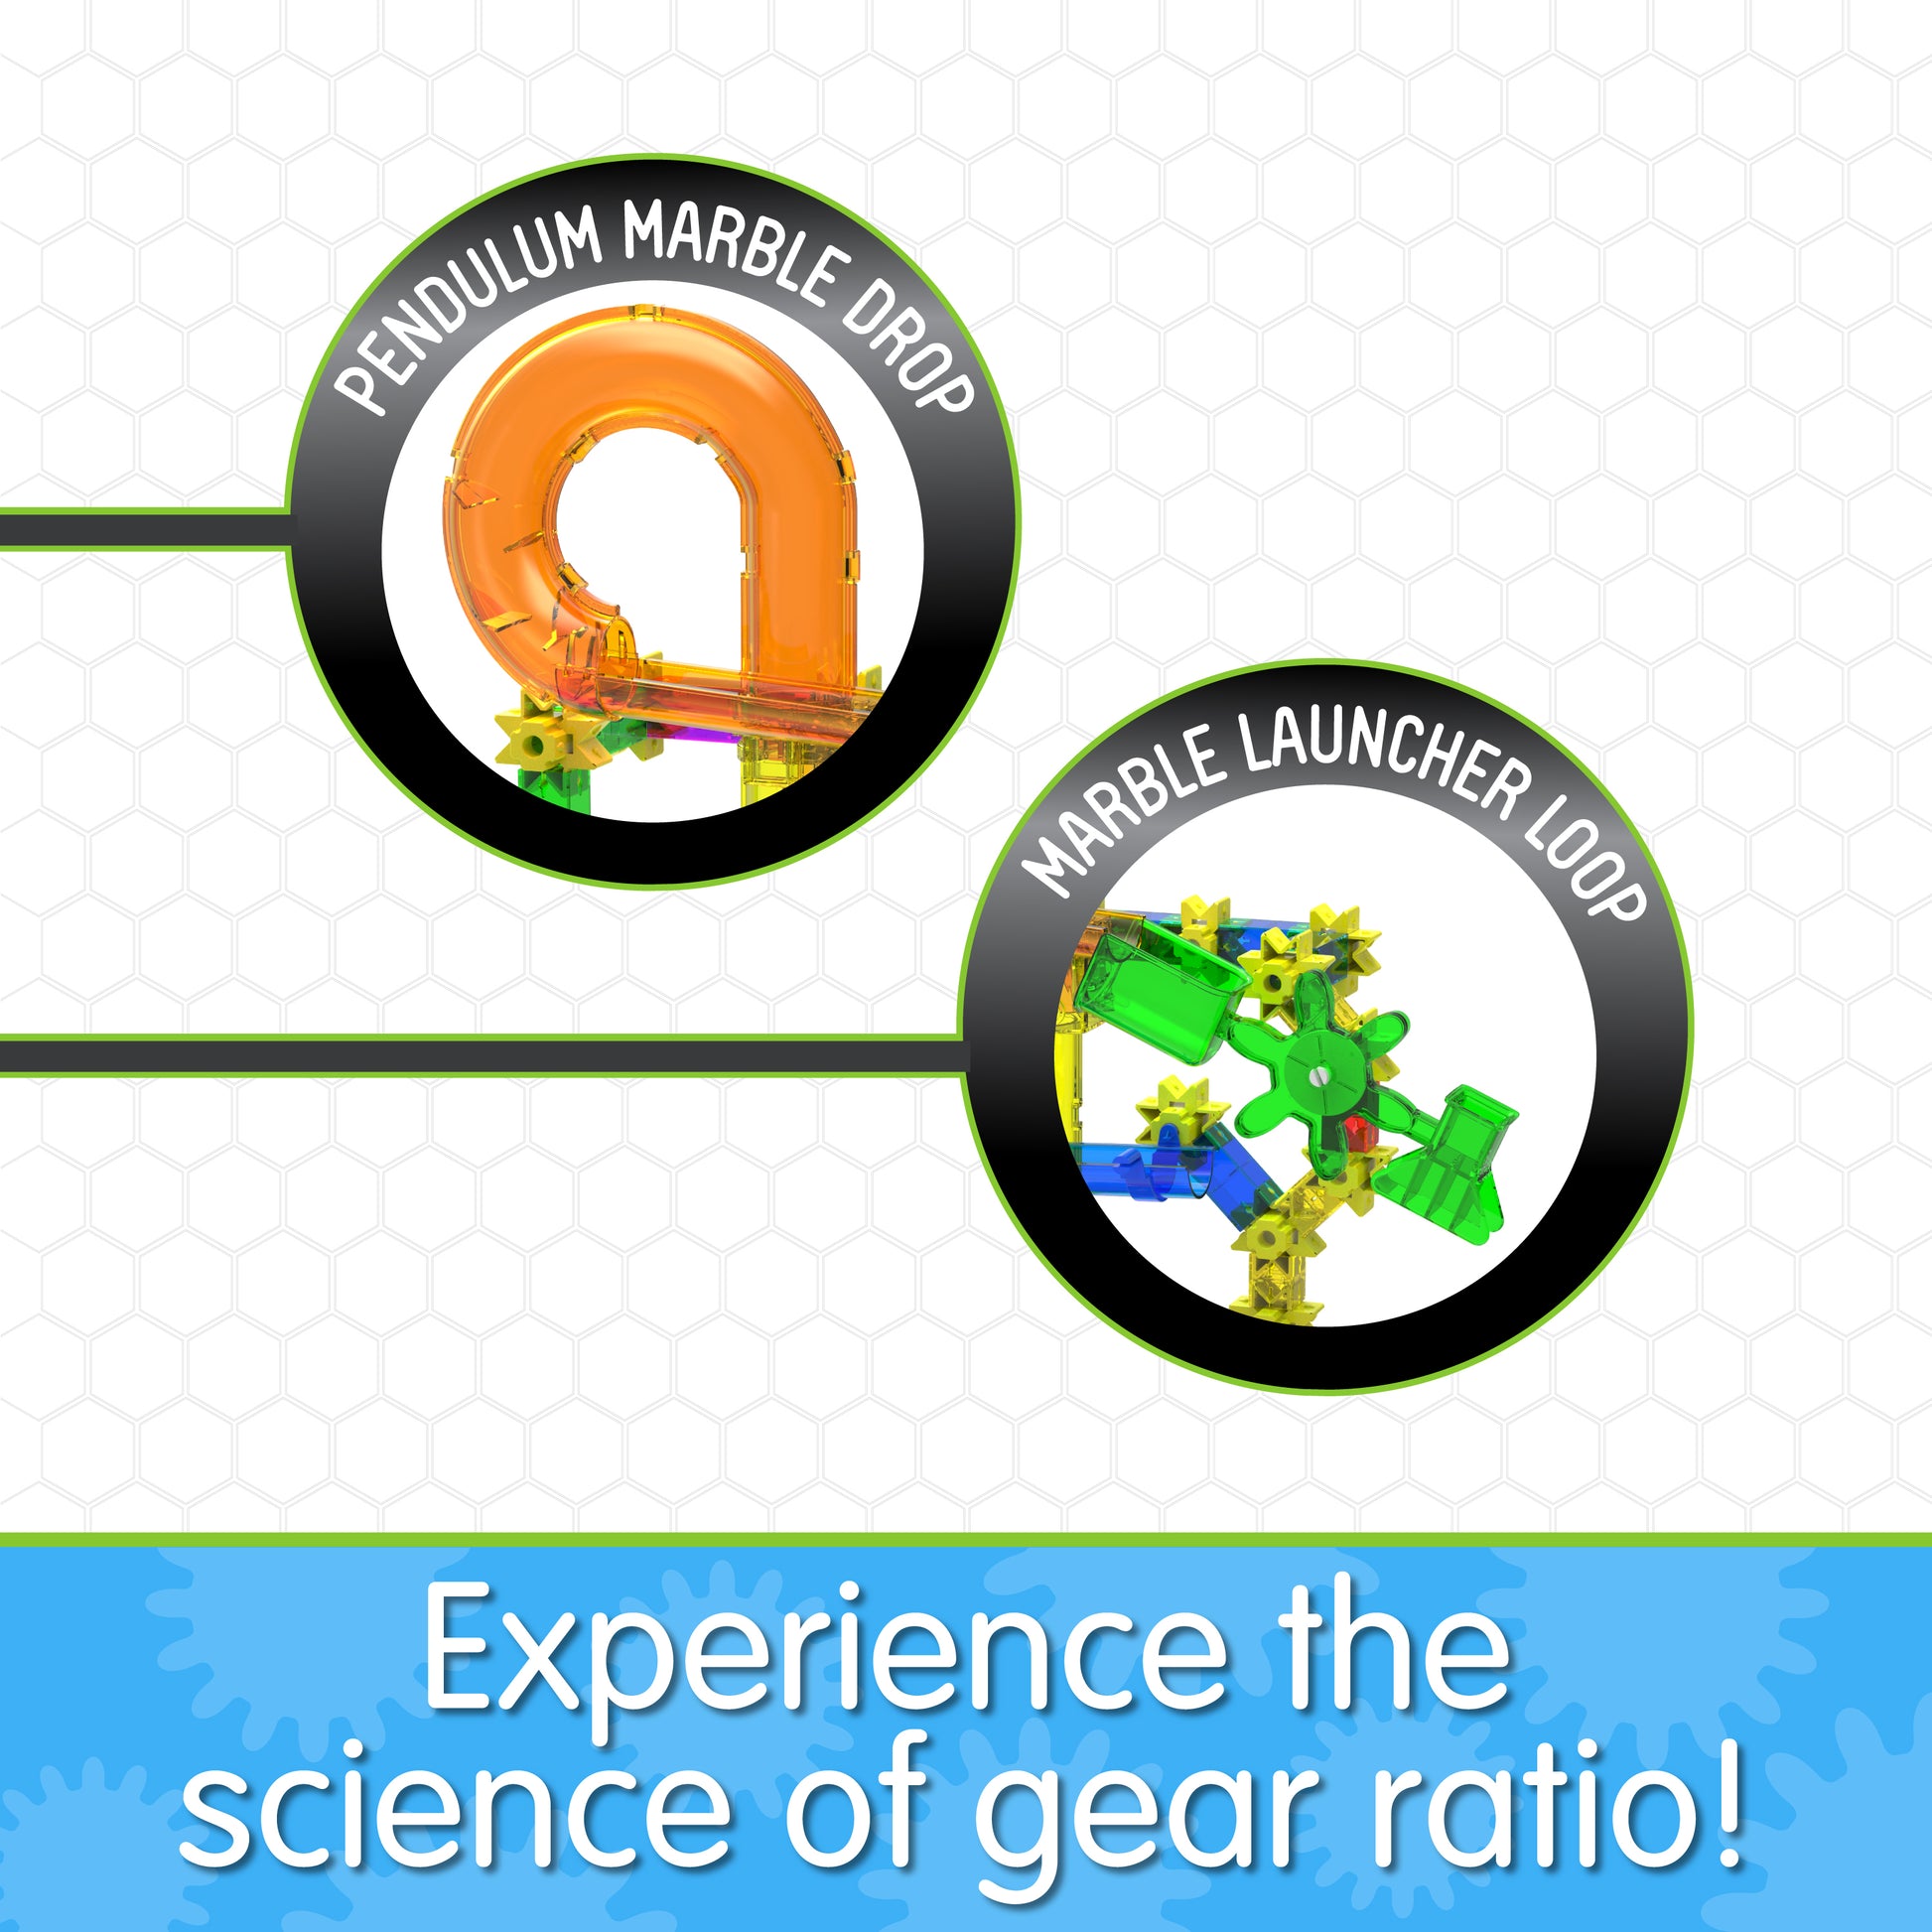 Infographic about Xpress' features that says, "Experience the science of gear ratio!"